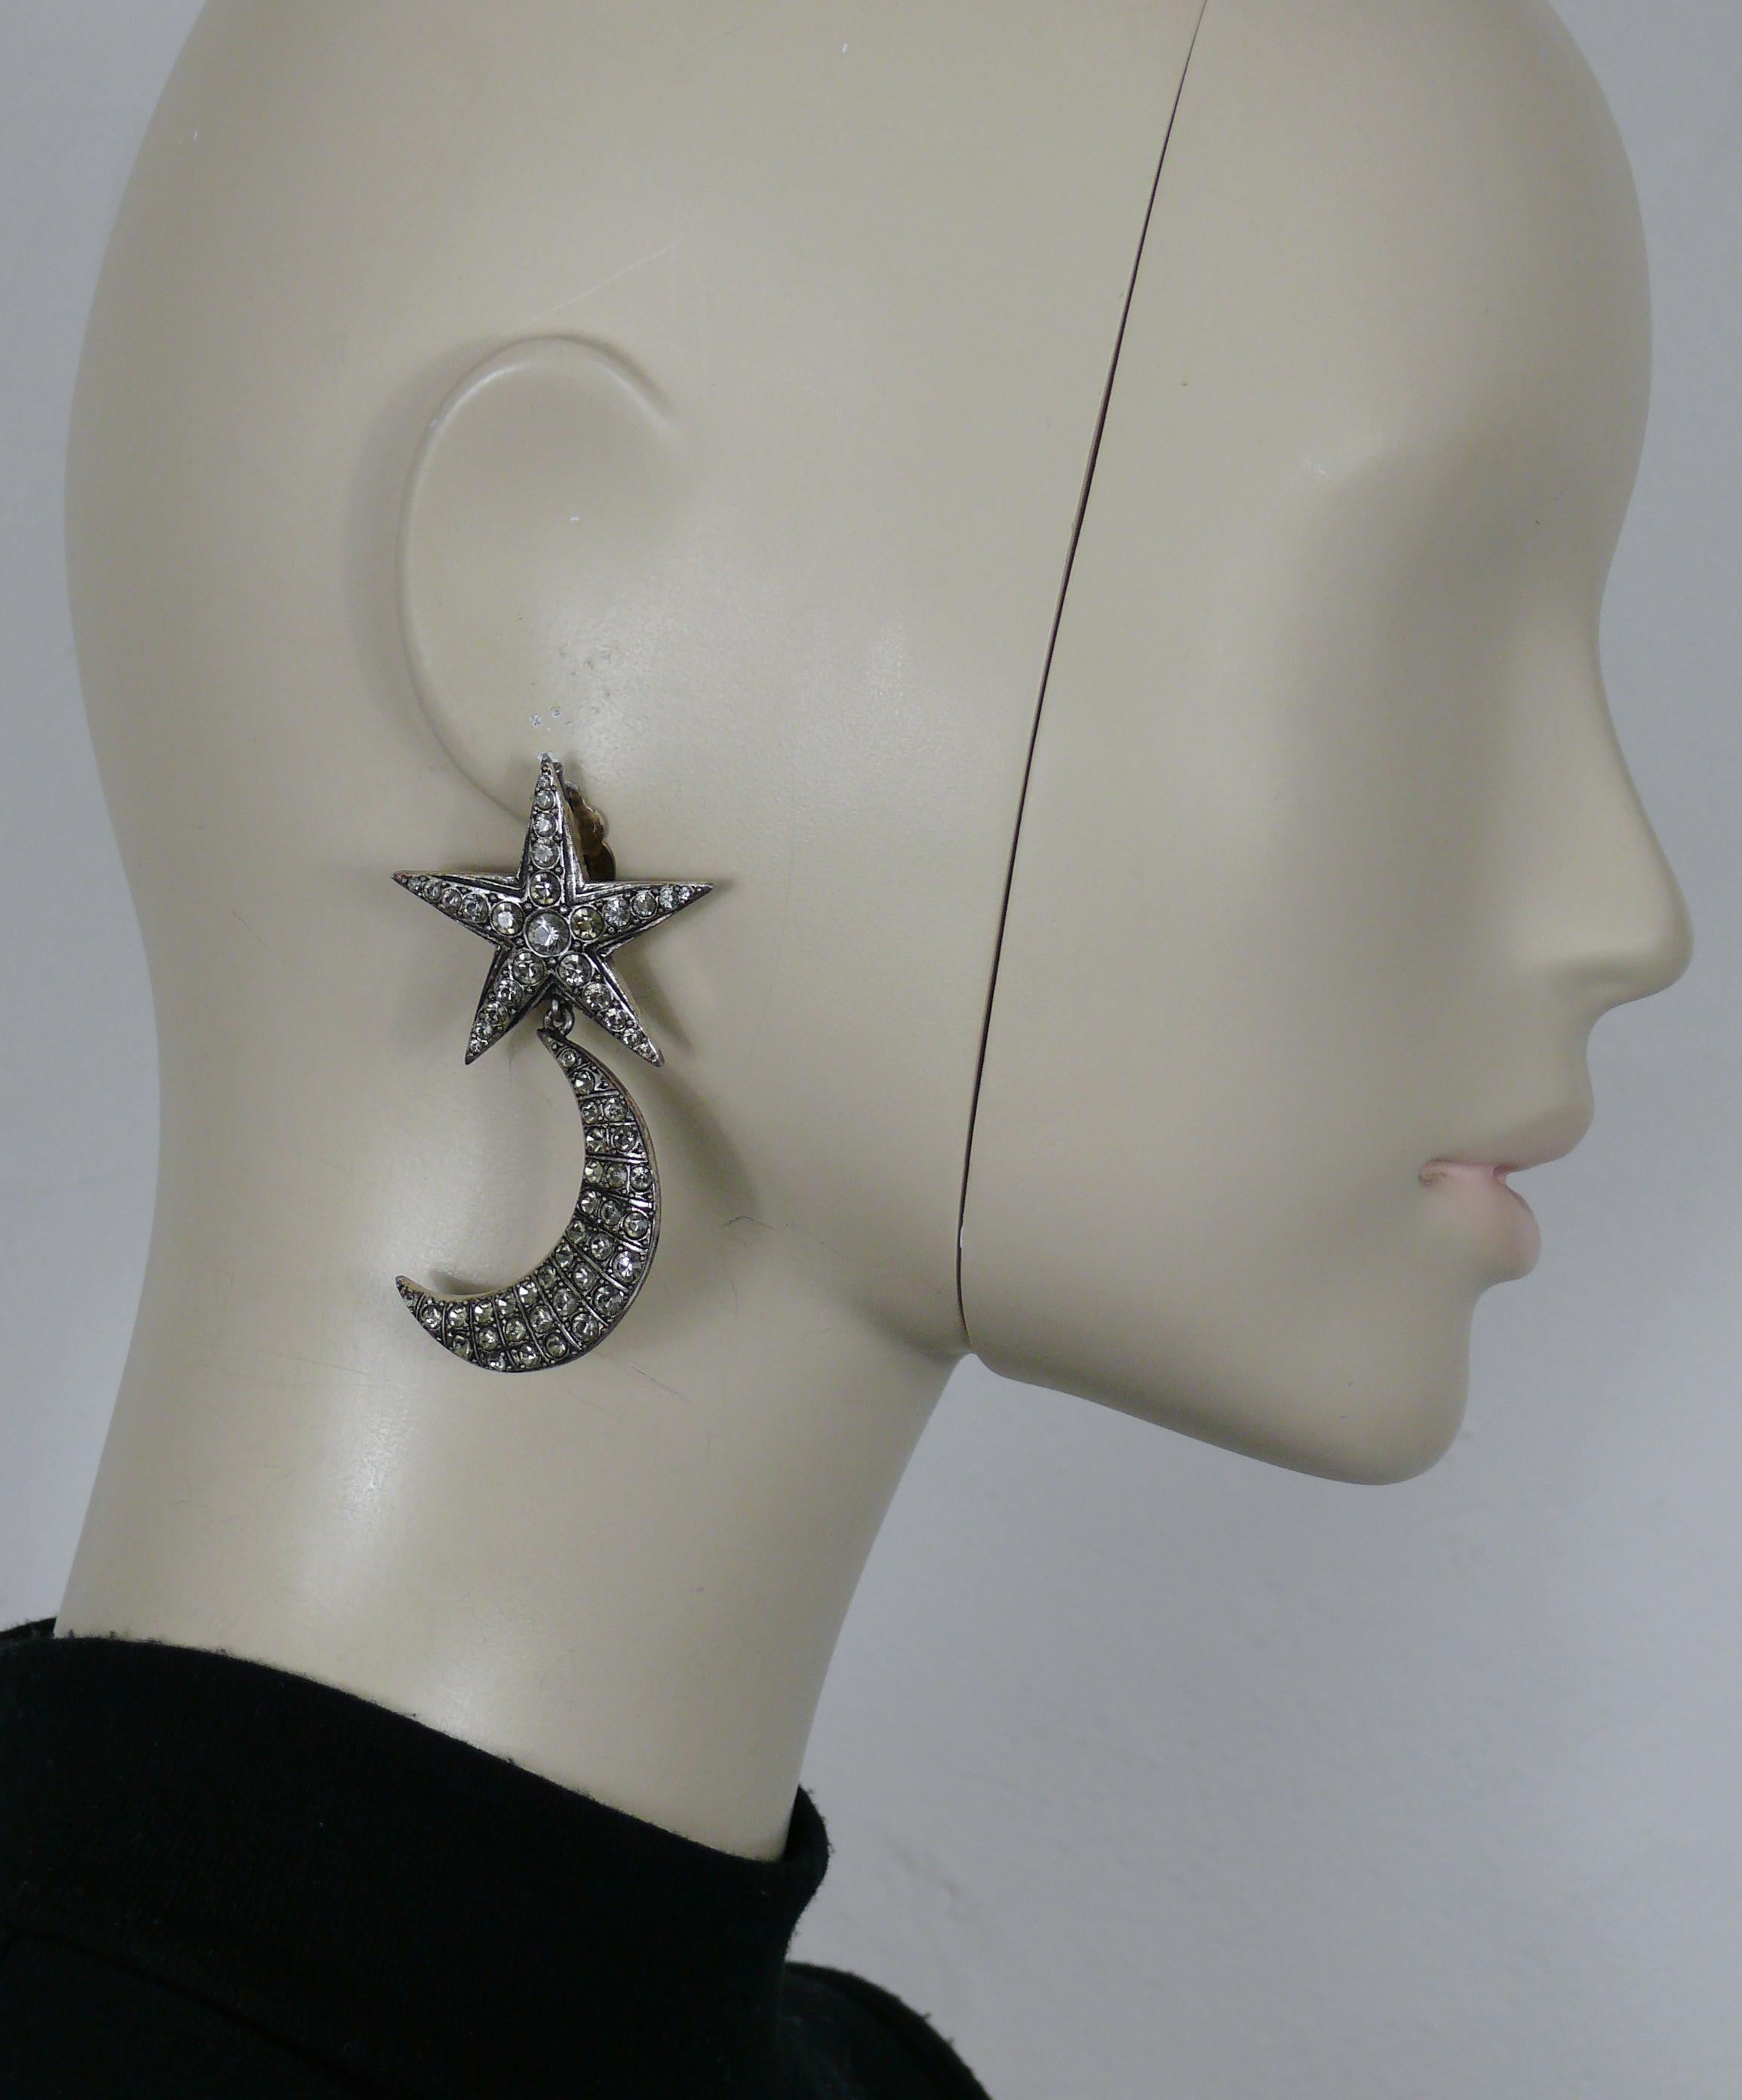 JEAN PAUL GAULTIER vintage antiqued silver tone dangling earrings (clip-on) featuring a star top and a crescent moon embellished with crystals (probably very light grey color ?).

Marked GAULTIER.

Indicative measurements : max. height approx. 6.8